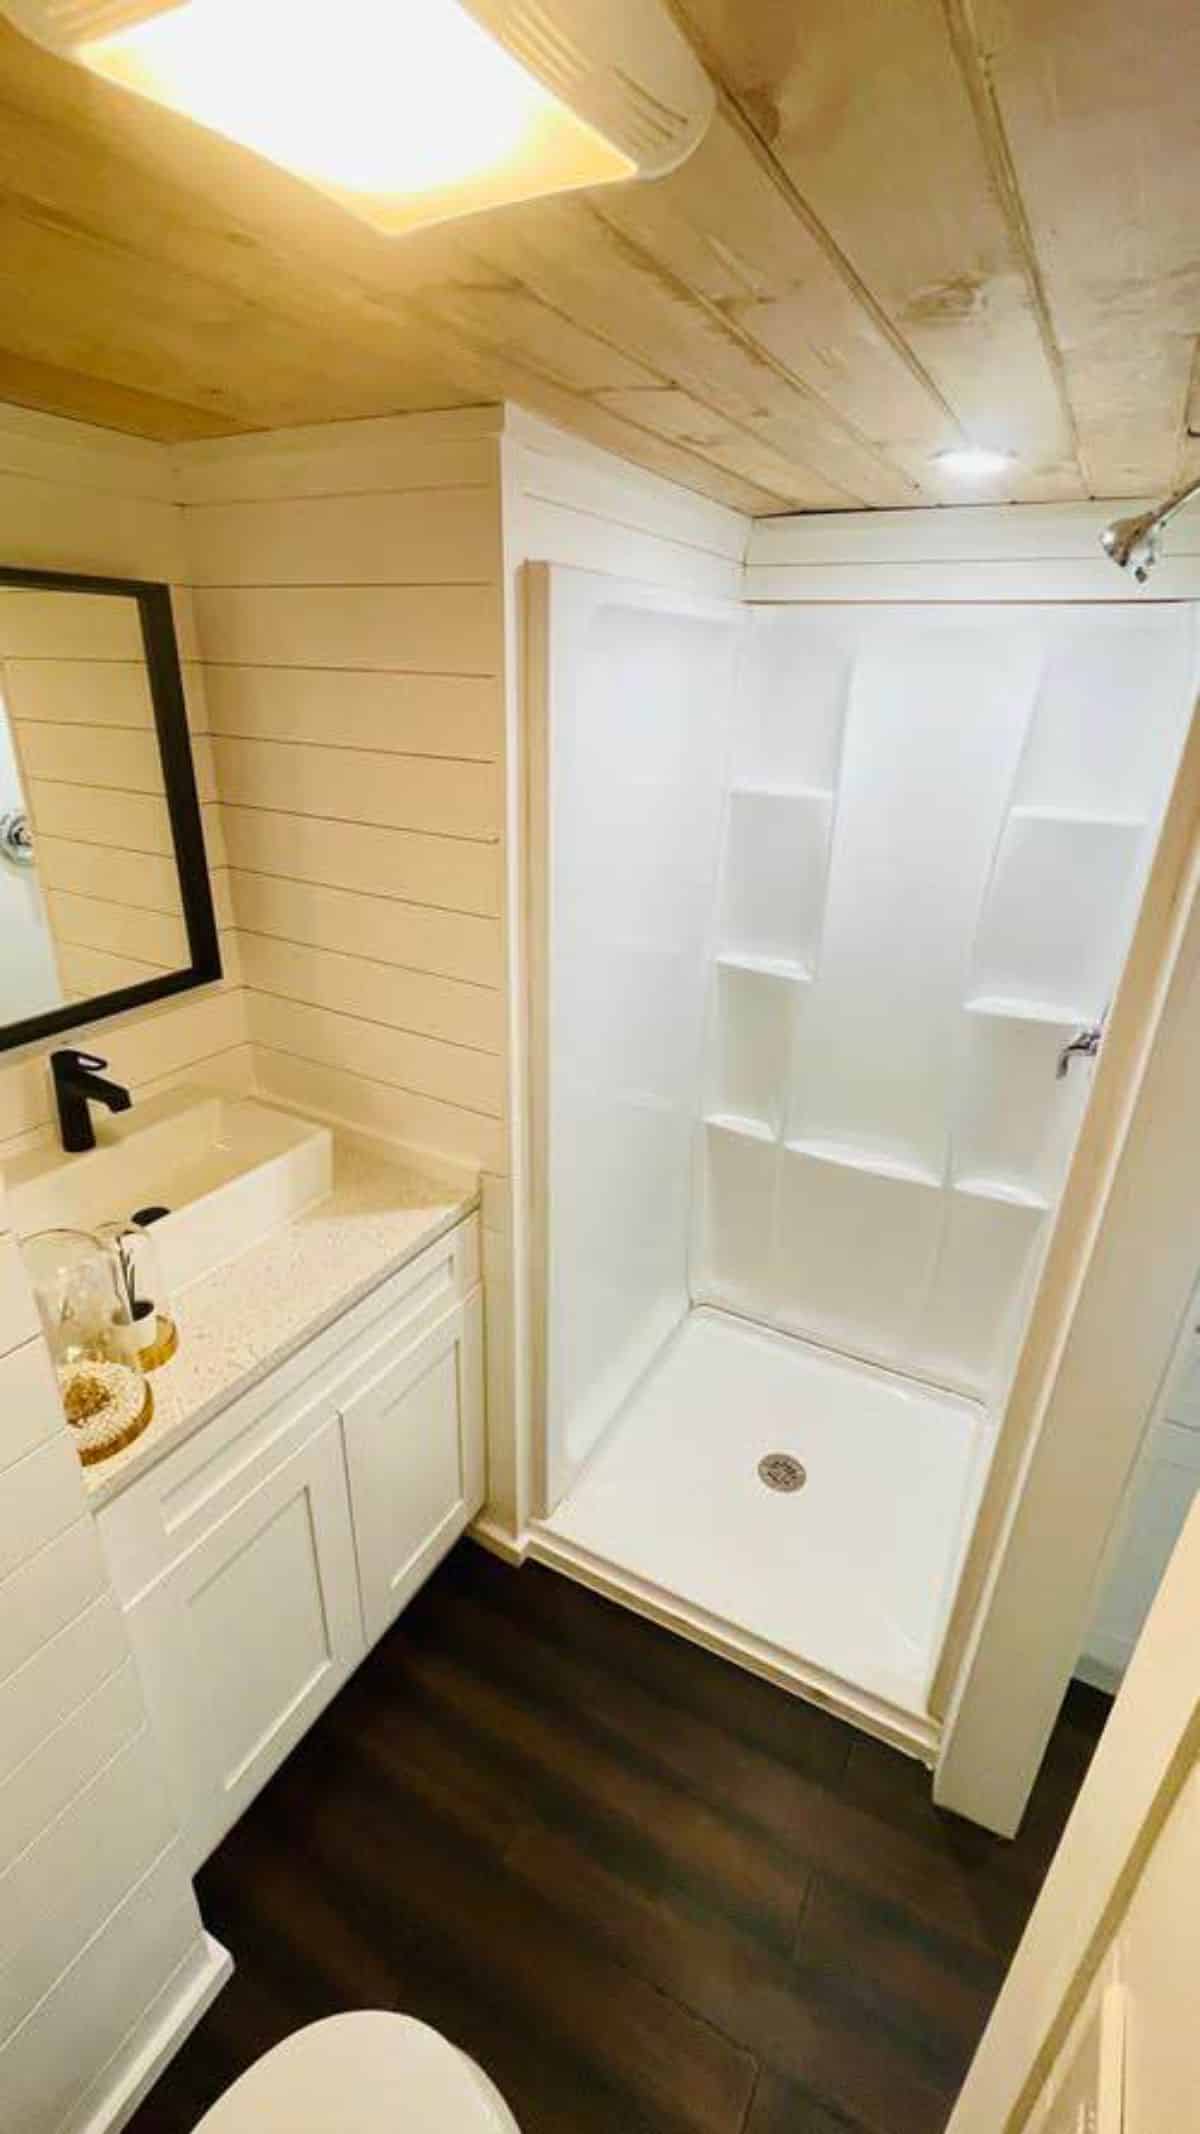 bathroom of 22’ durable tiny home has all the standard fittings